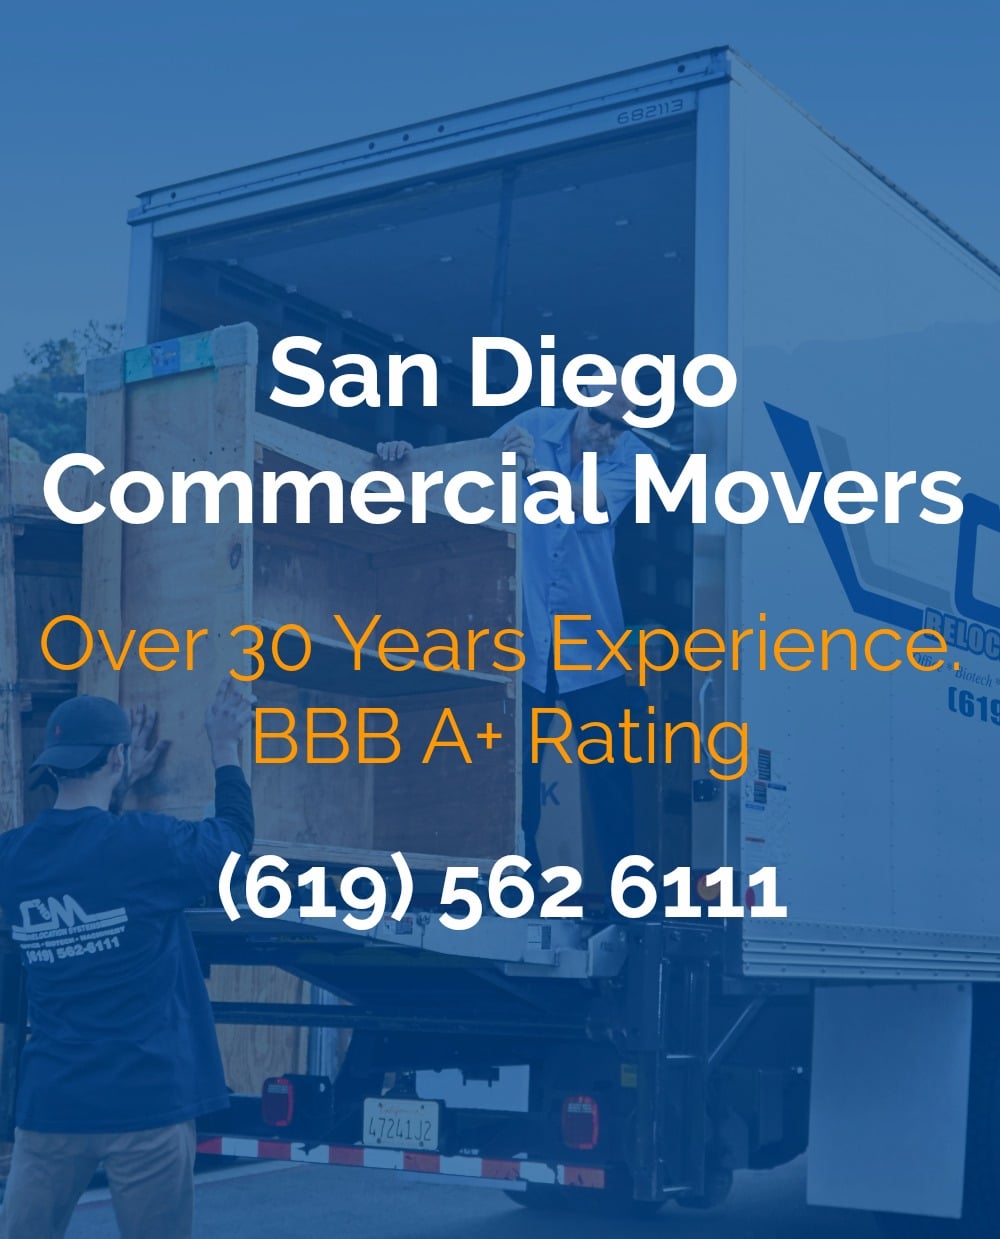 San Diego Commercial Movers